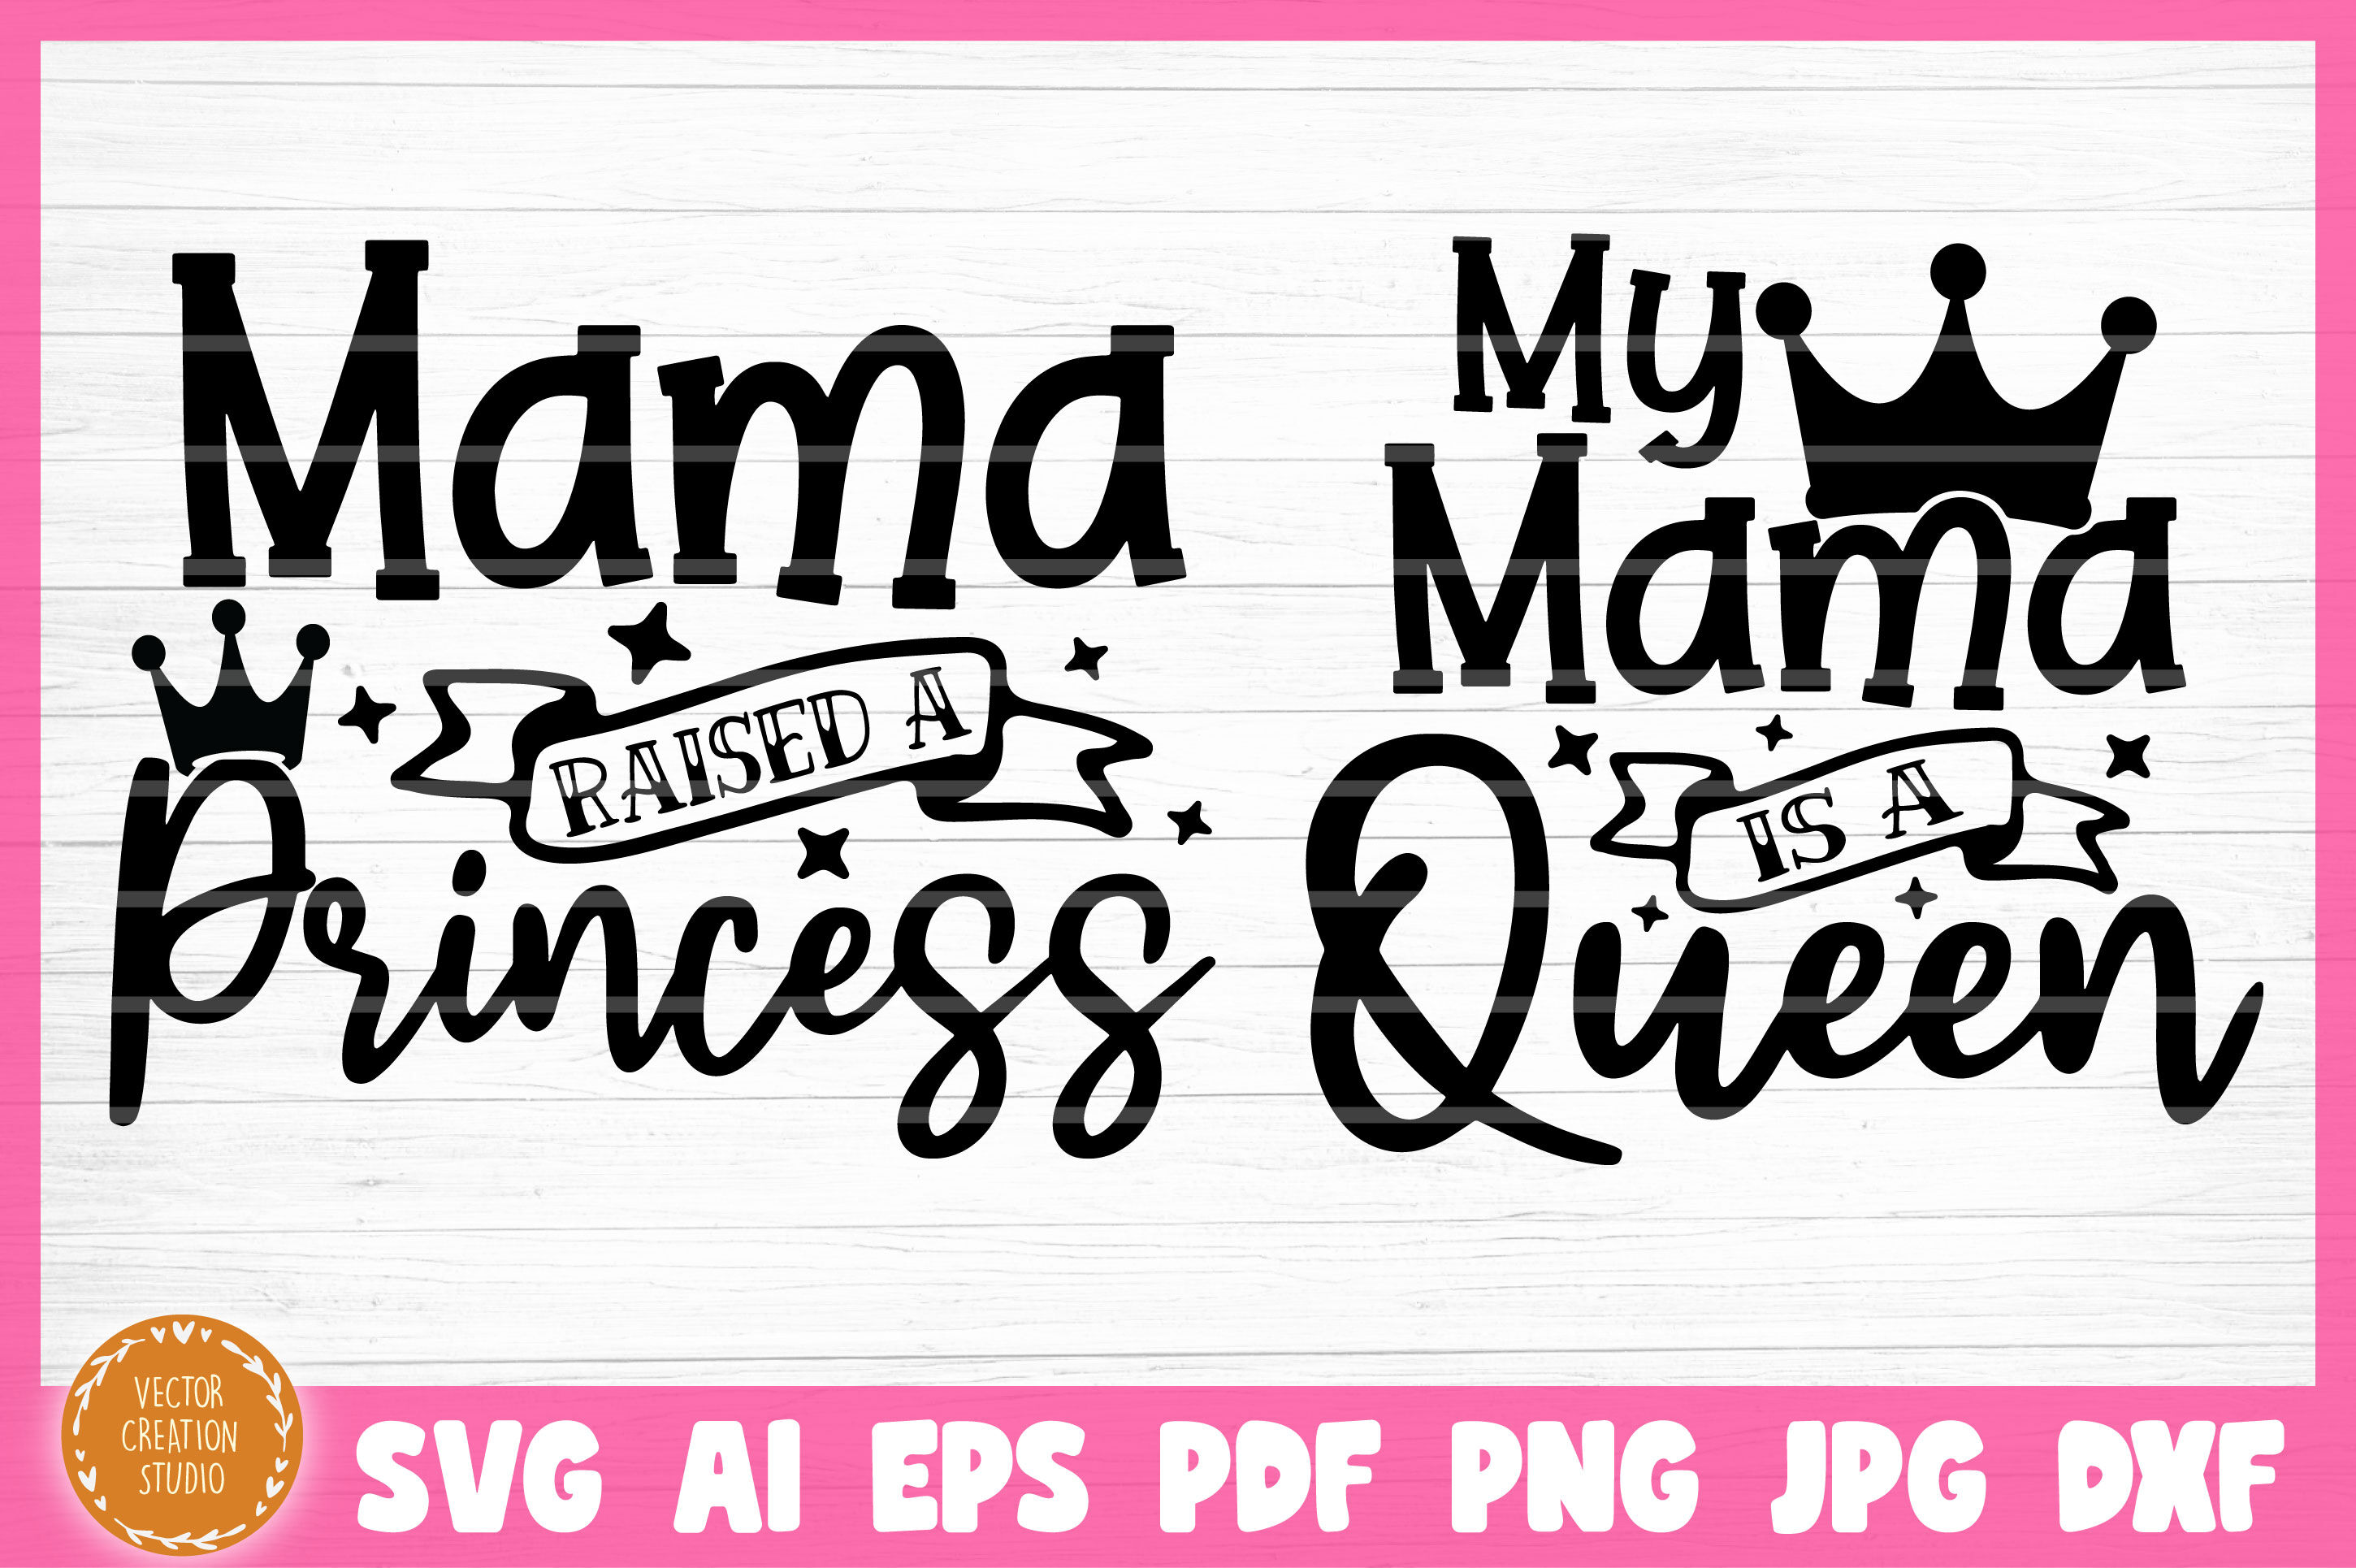 Download Mama Is A Queen Mama Raised A Princess Mother Daughter Svg Cut Files By Vectorcreationstudio Thehungryjpeg Com